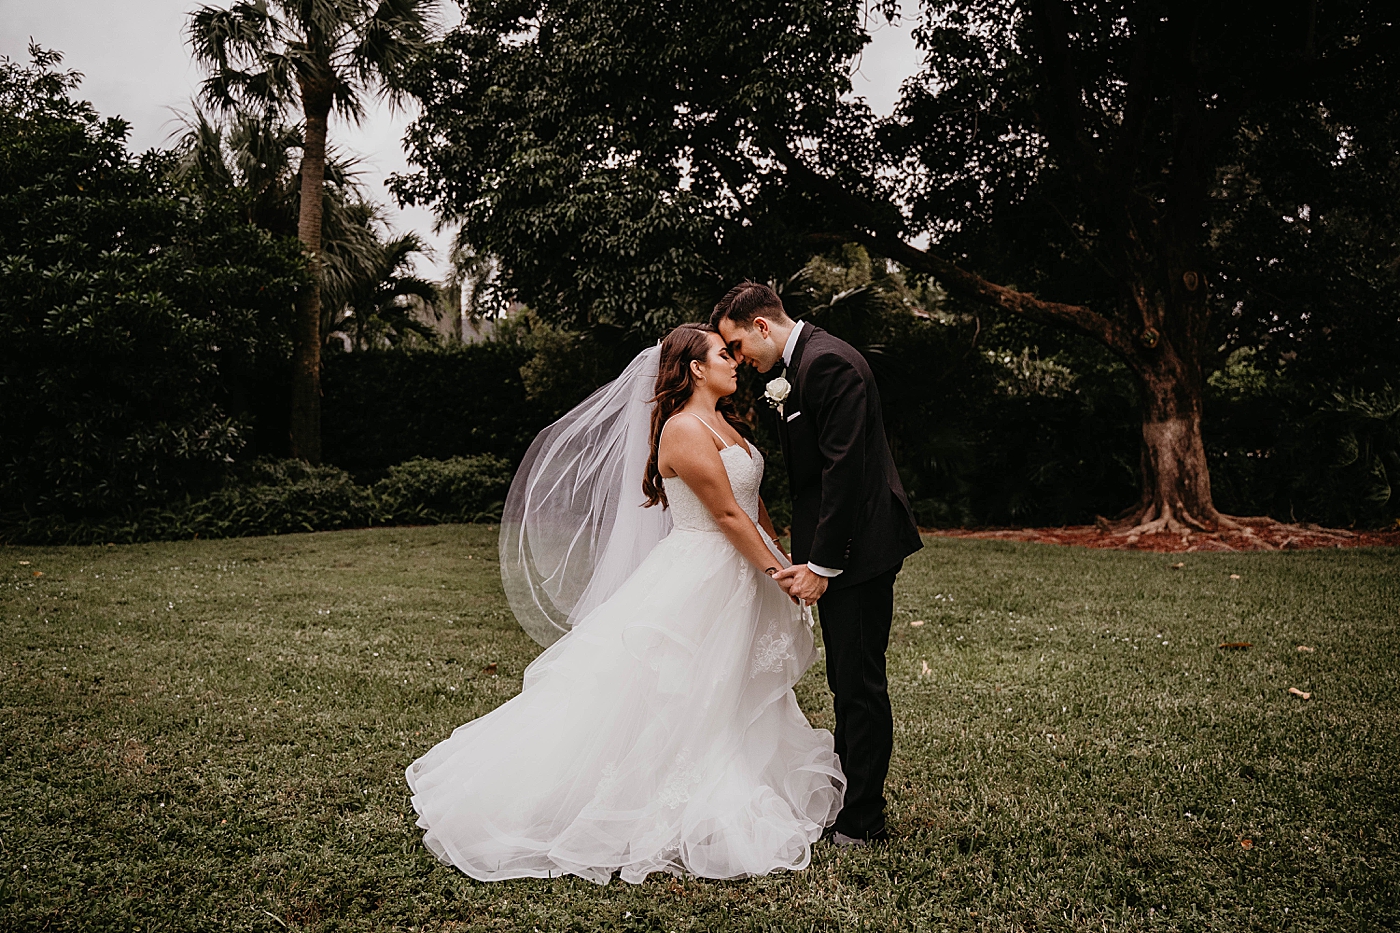 Bride and Groom holding each other close Intimate South Florida Wedding Photography captured by Wedding Photographer Krystal Capone Photography